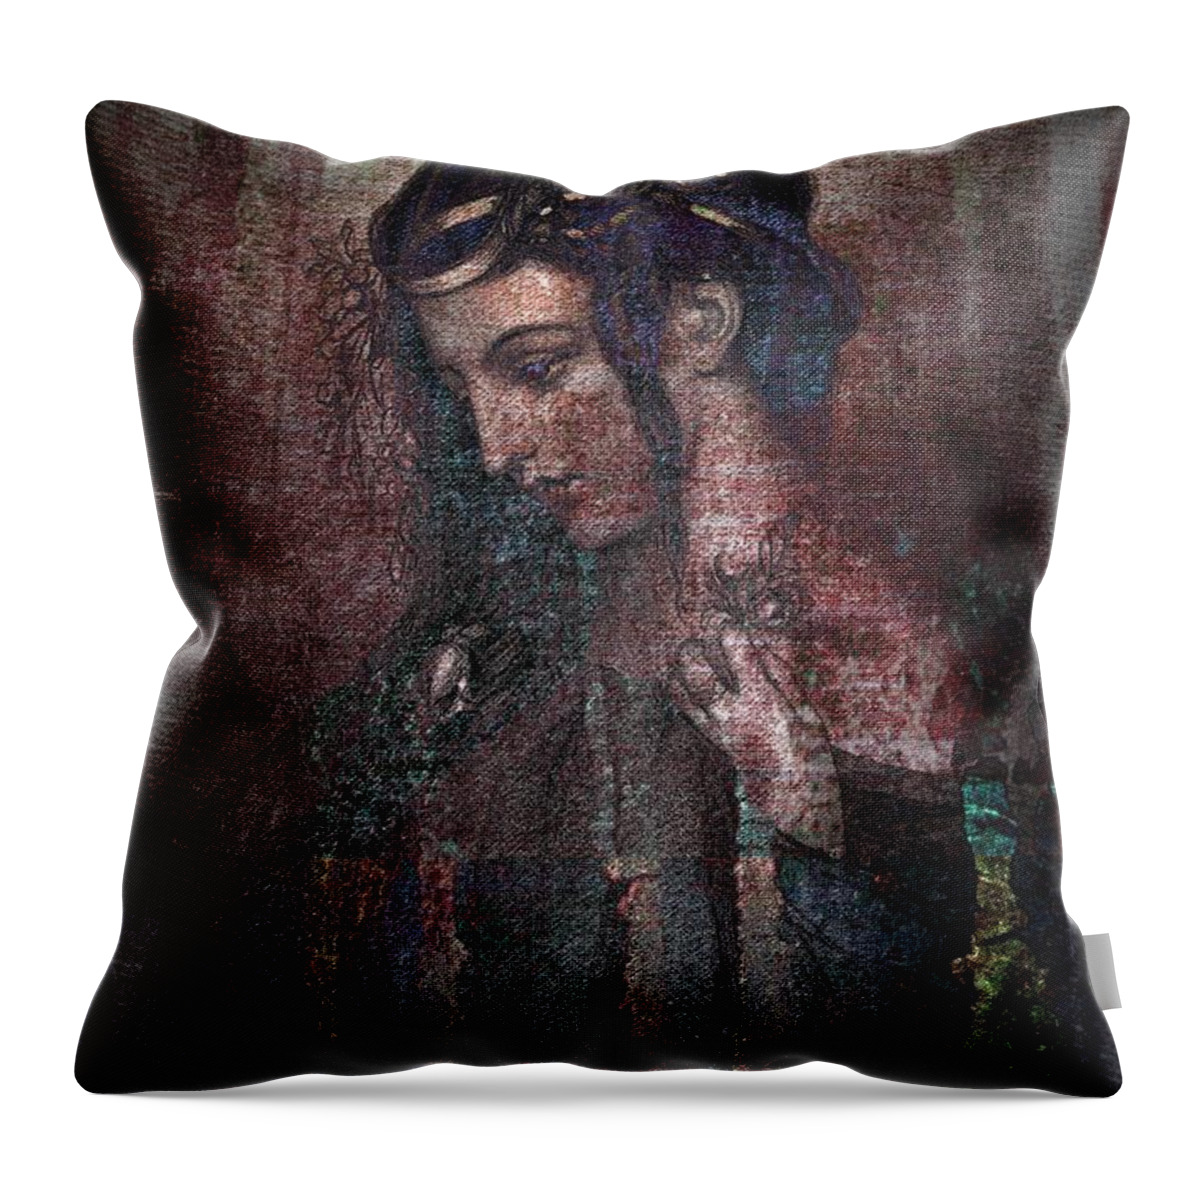 Ophelia Throw Pillow featuring the digital art Ophelia by Mimulux Patricia No